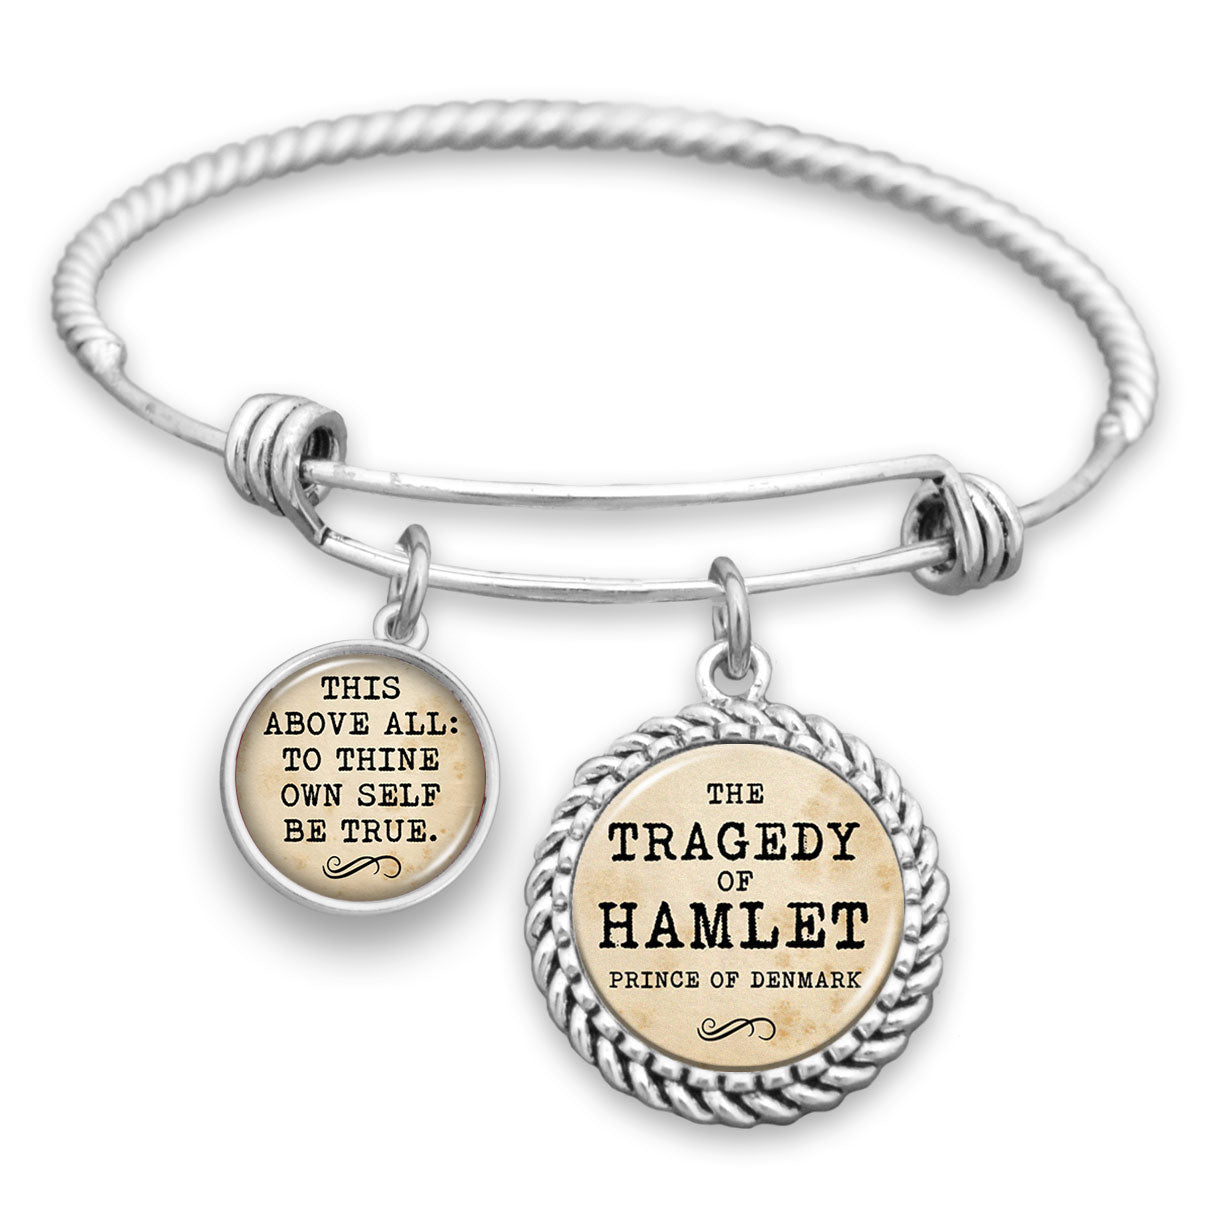 This Above All: To Thine Own Self Be True Charm Bracelet